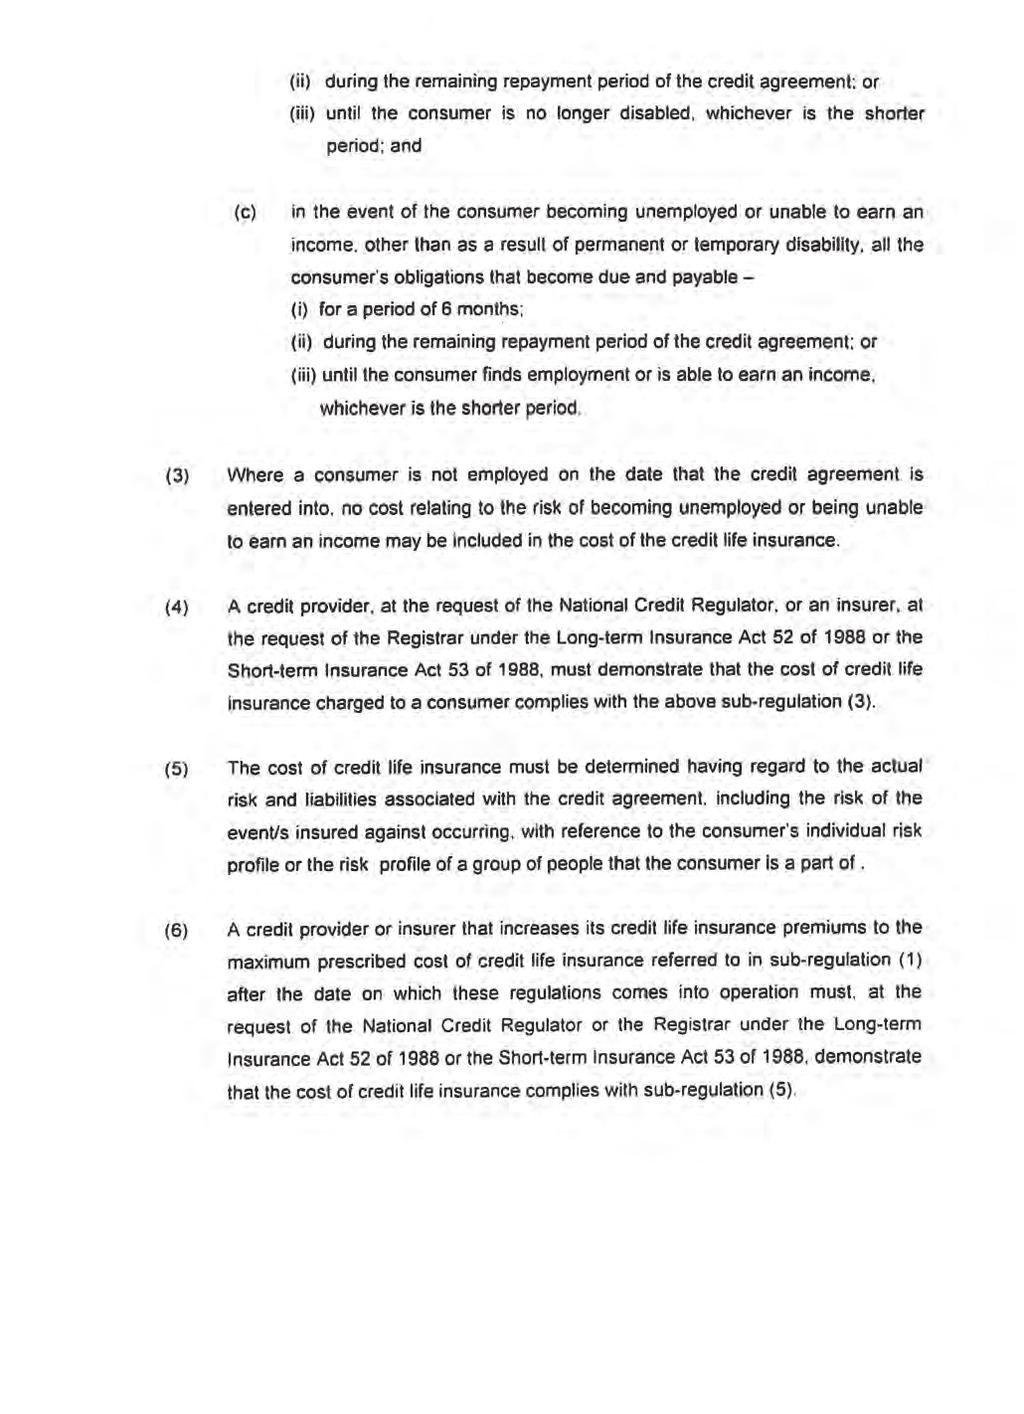 8 No. 39407 GOVERNMENT GAZETTE, 13 NOVEMBER 2015 (ii) (iii) during the remaining repayment period of the credit agreement: or until the consumer is no longer disabled, whichever is the shorter